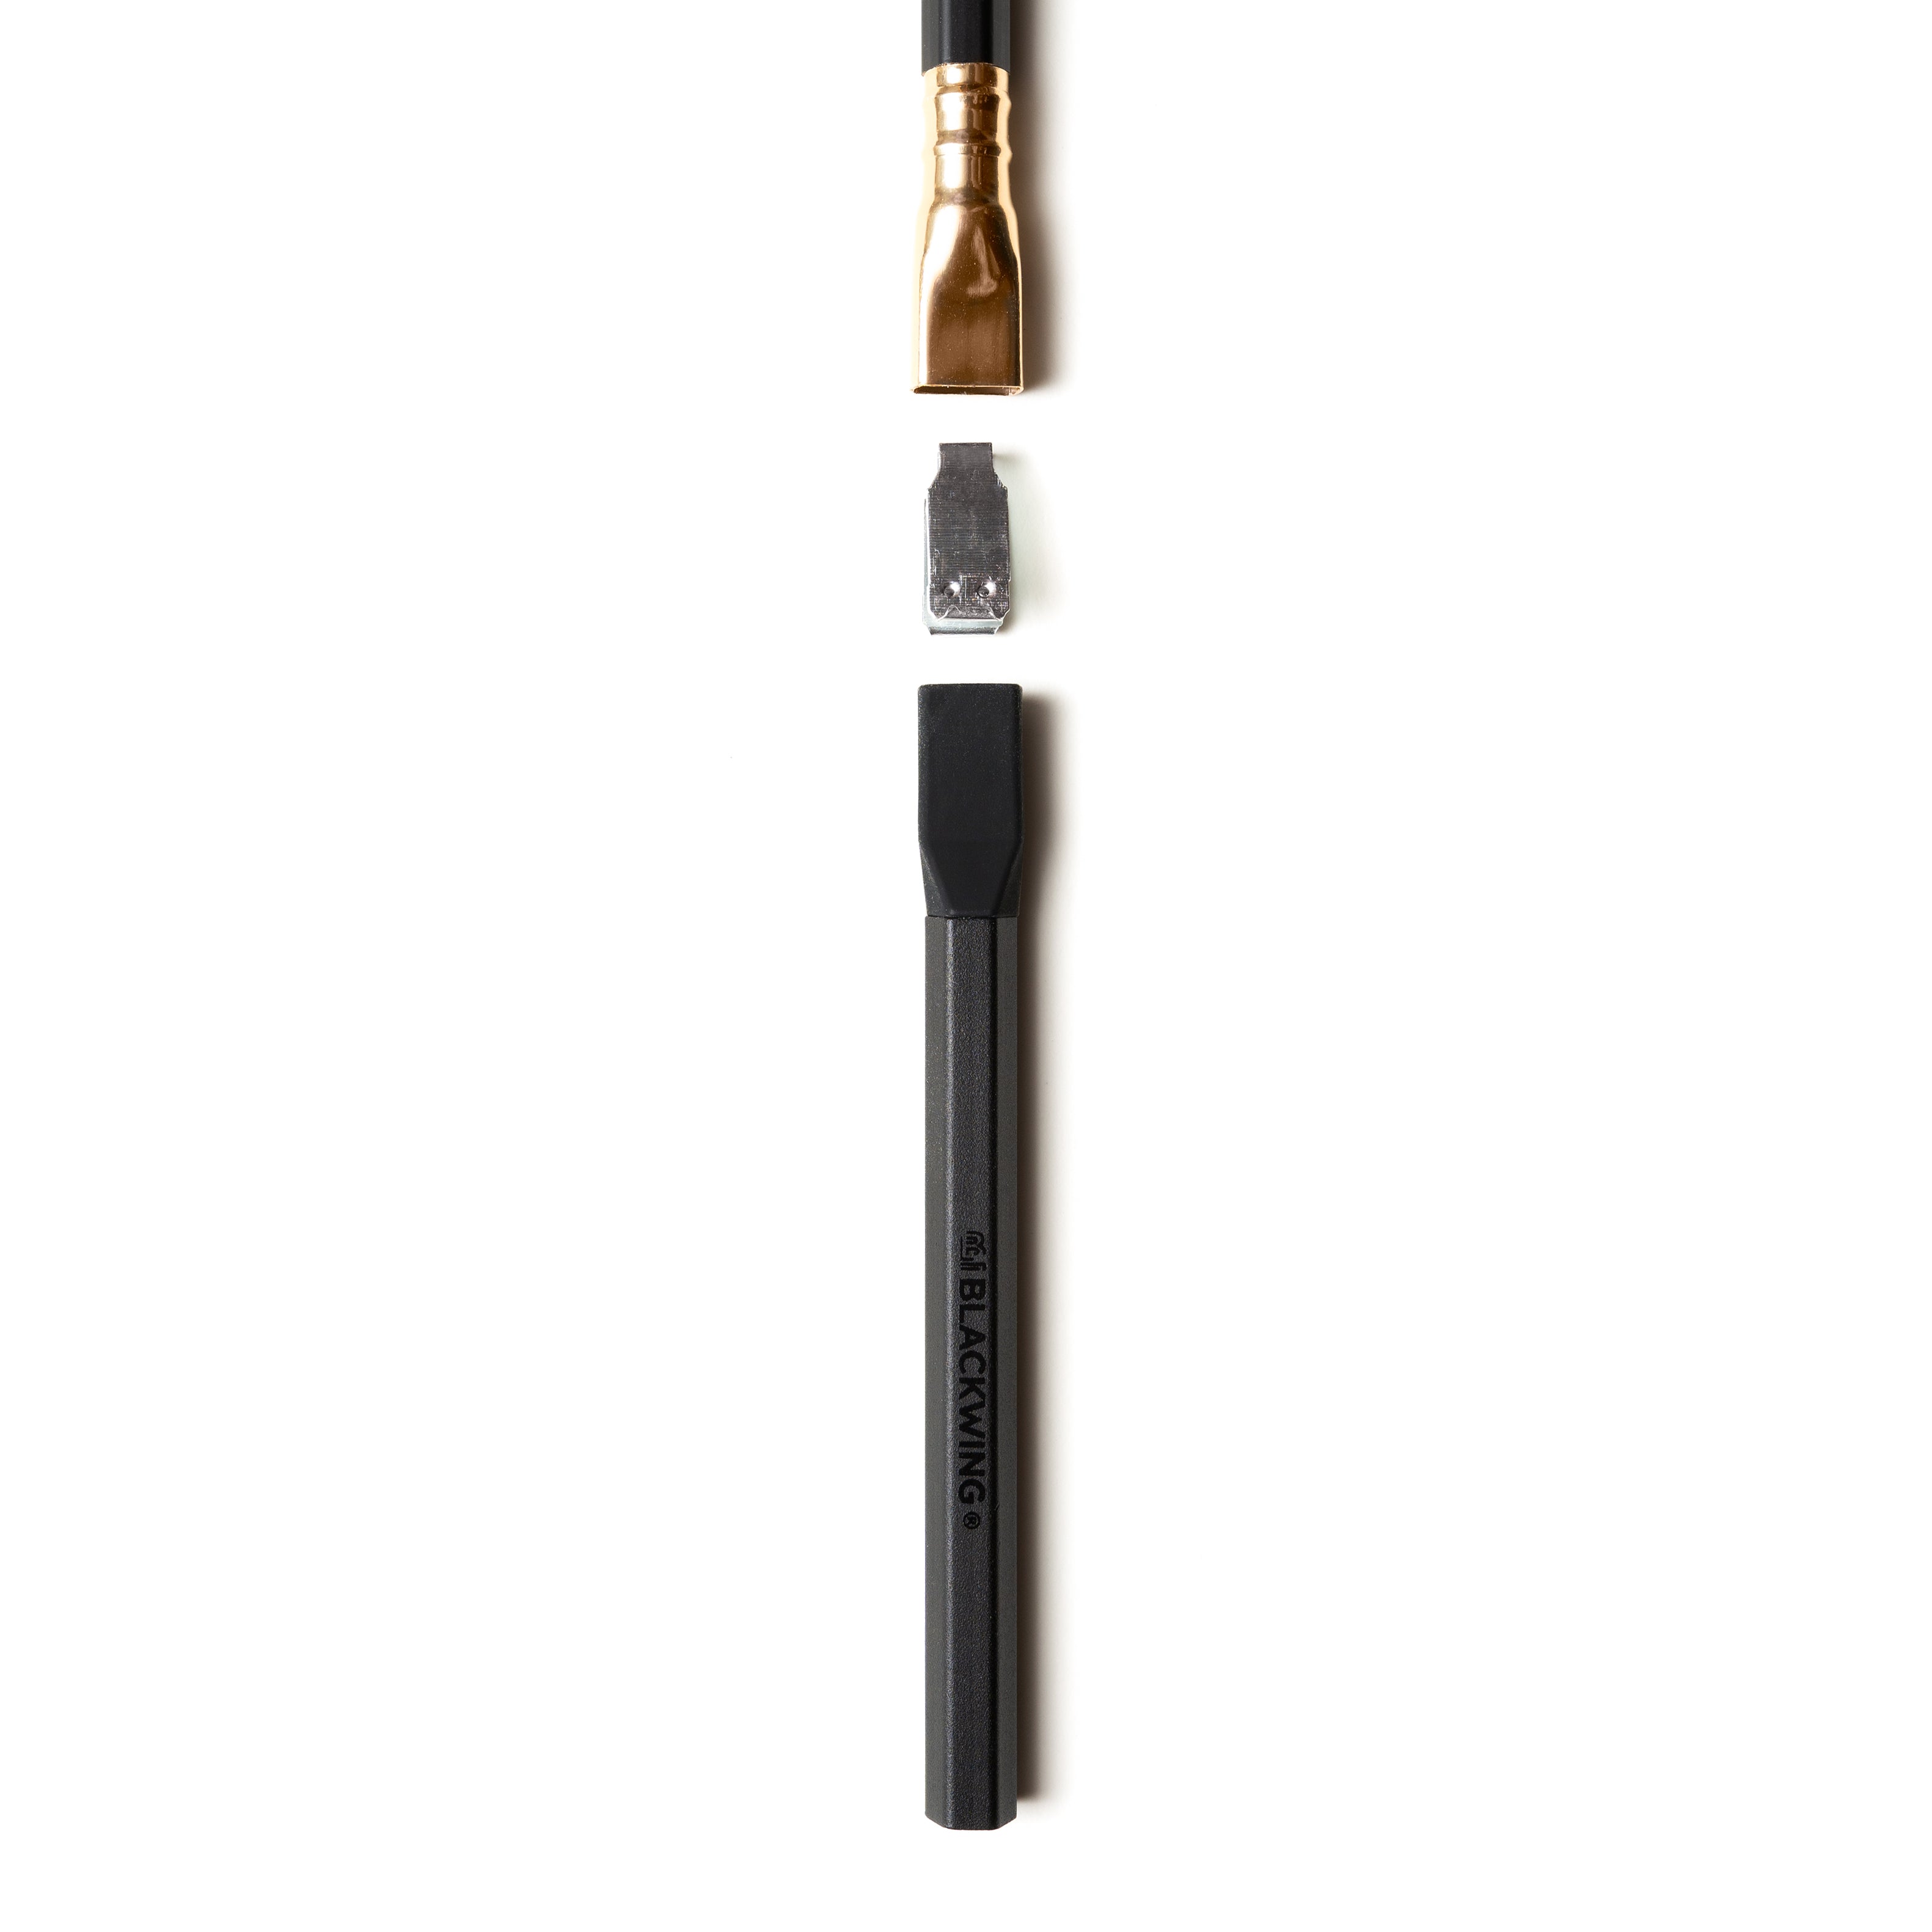 Blackwing Pencil Extender- The simple design allows the extender to slide into the clip of the existing Blackwing ferrule and will work with any Blackwing pencil model. 